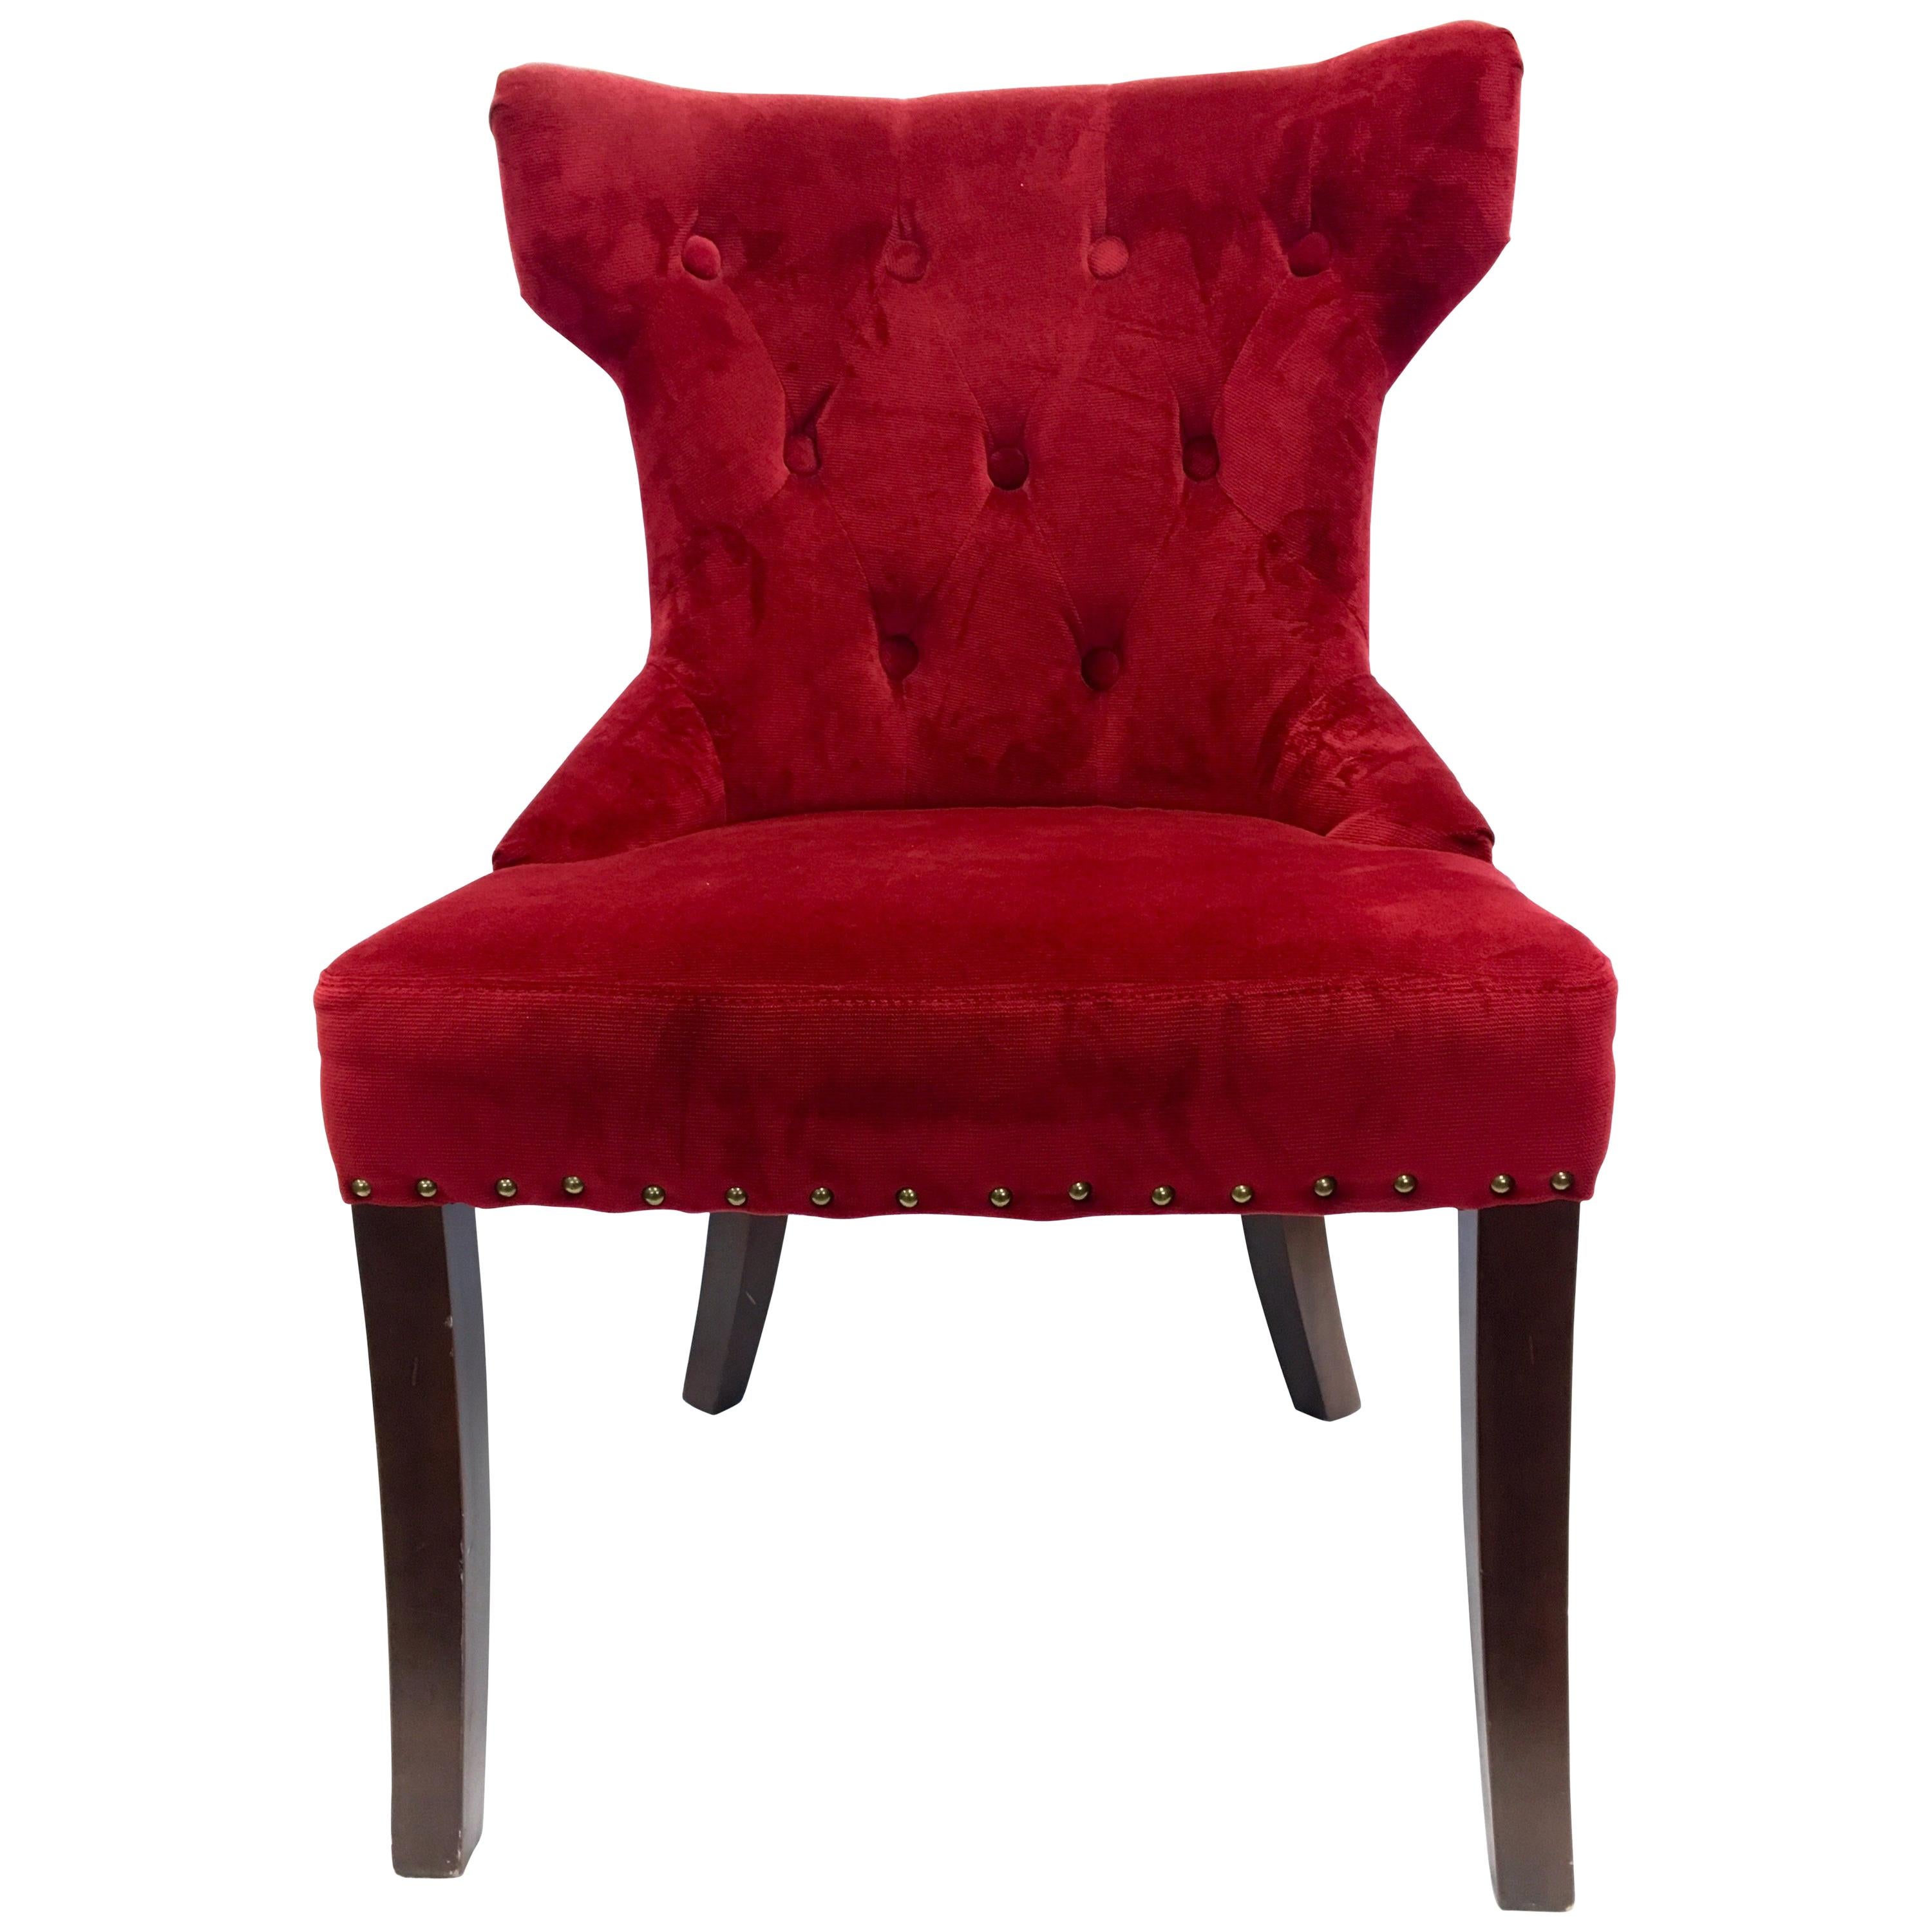 Pair of Custom Upholstered Nailhead Red Tufted Dining Chairs